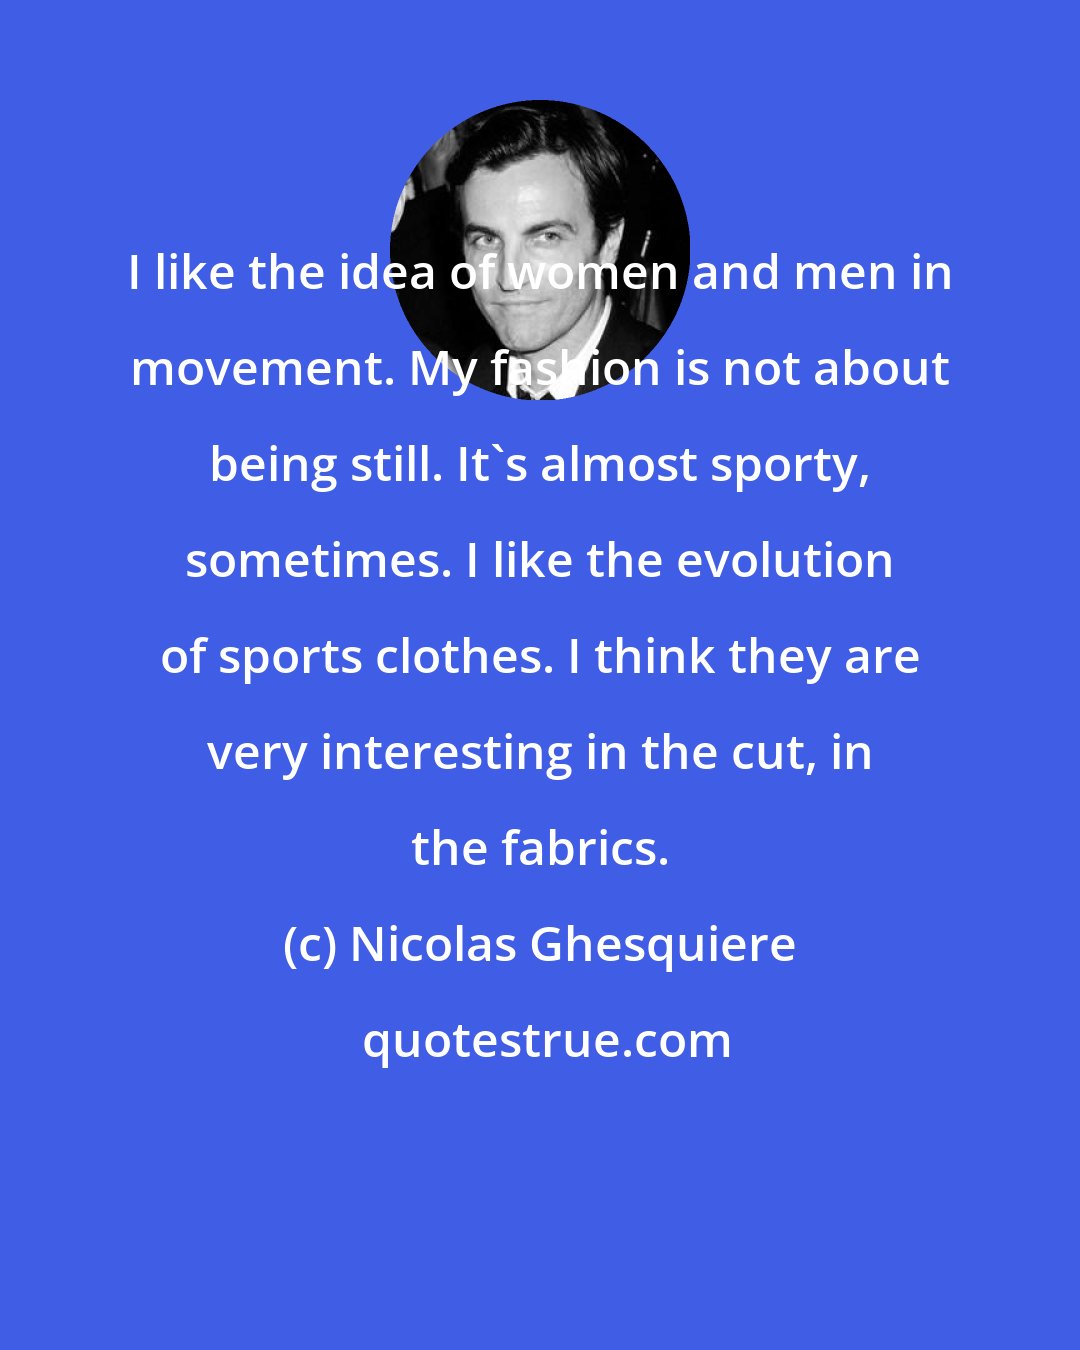 Nicolas Ghesquiere: I like the idea of women and men in movement. My fashion is not about being still. It's almost sporty, sometimes. I like the evolution of sports clothes. I think they are very interesting in the cut, in the fabrics.